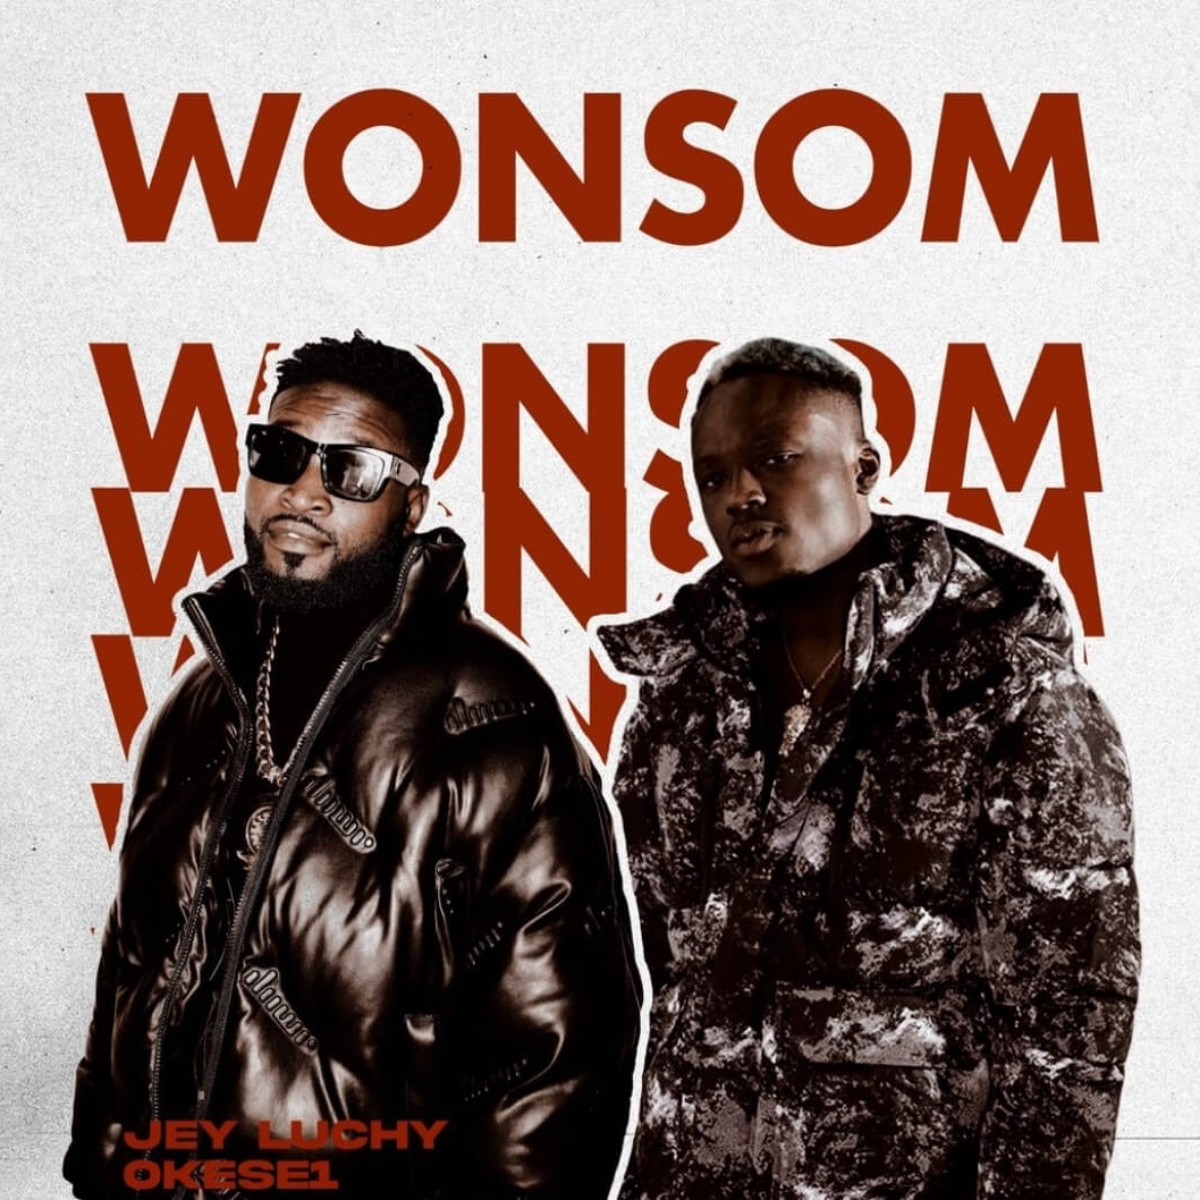 Jey Luchy – Wonsom Ft Okese1 (Prod. By SectorMadeIt)